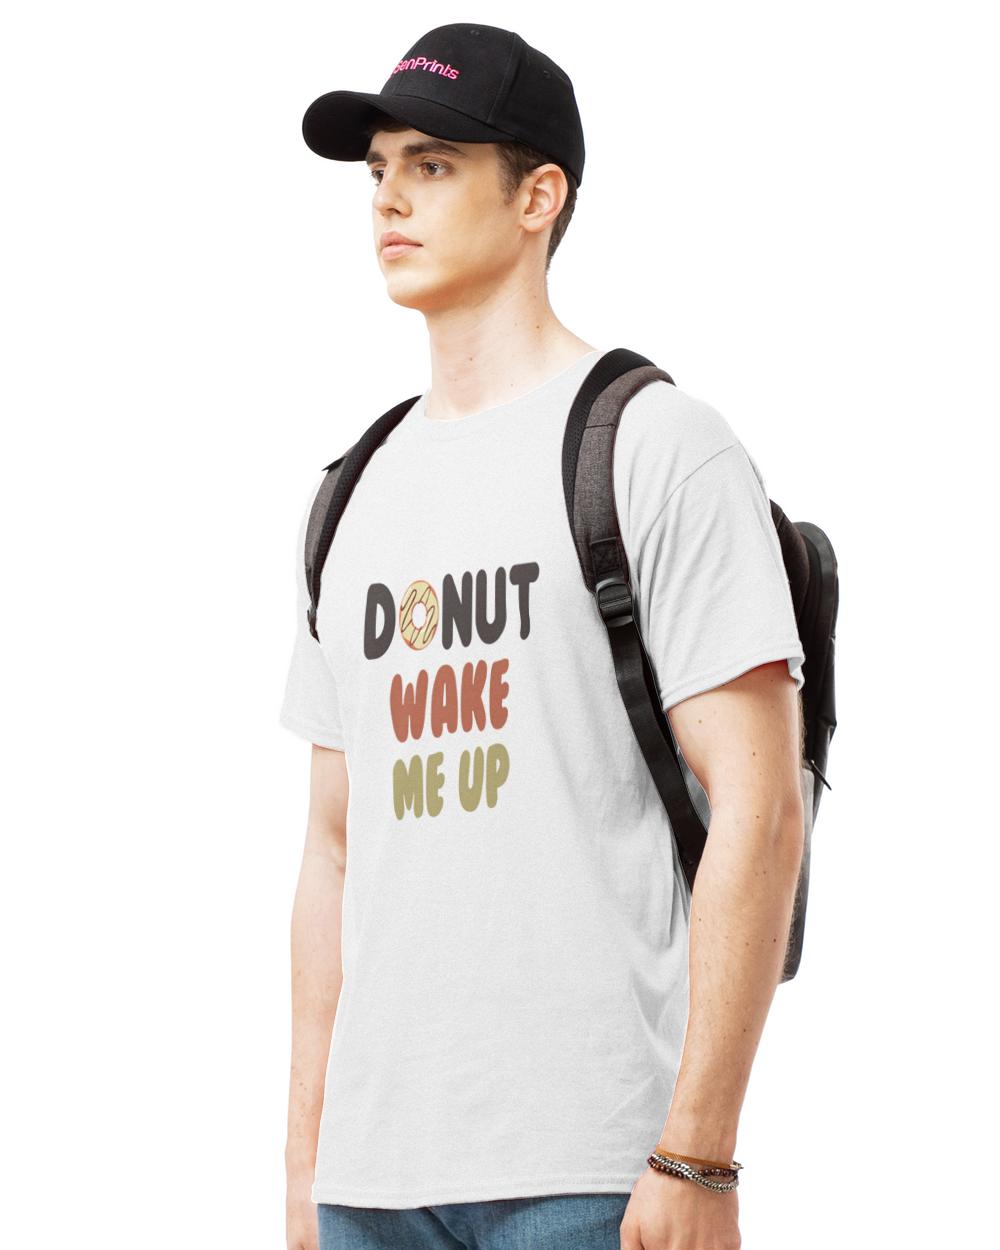 Premium donut wake me up baby  funny donuts cute sleepy doughnut quote puns humour lazy rest saying resting nap meme let do not disturb sleeping quotes9511 t-shirt